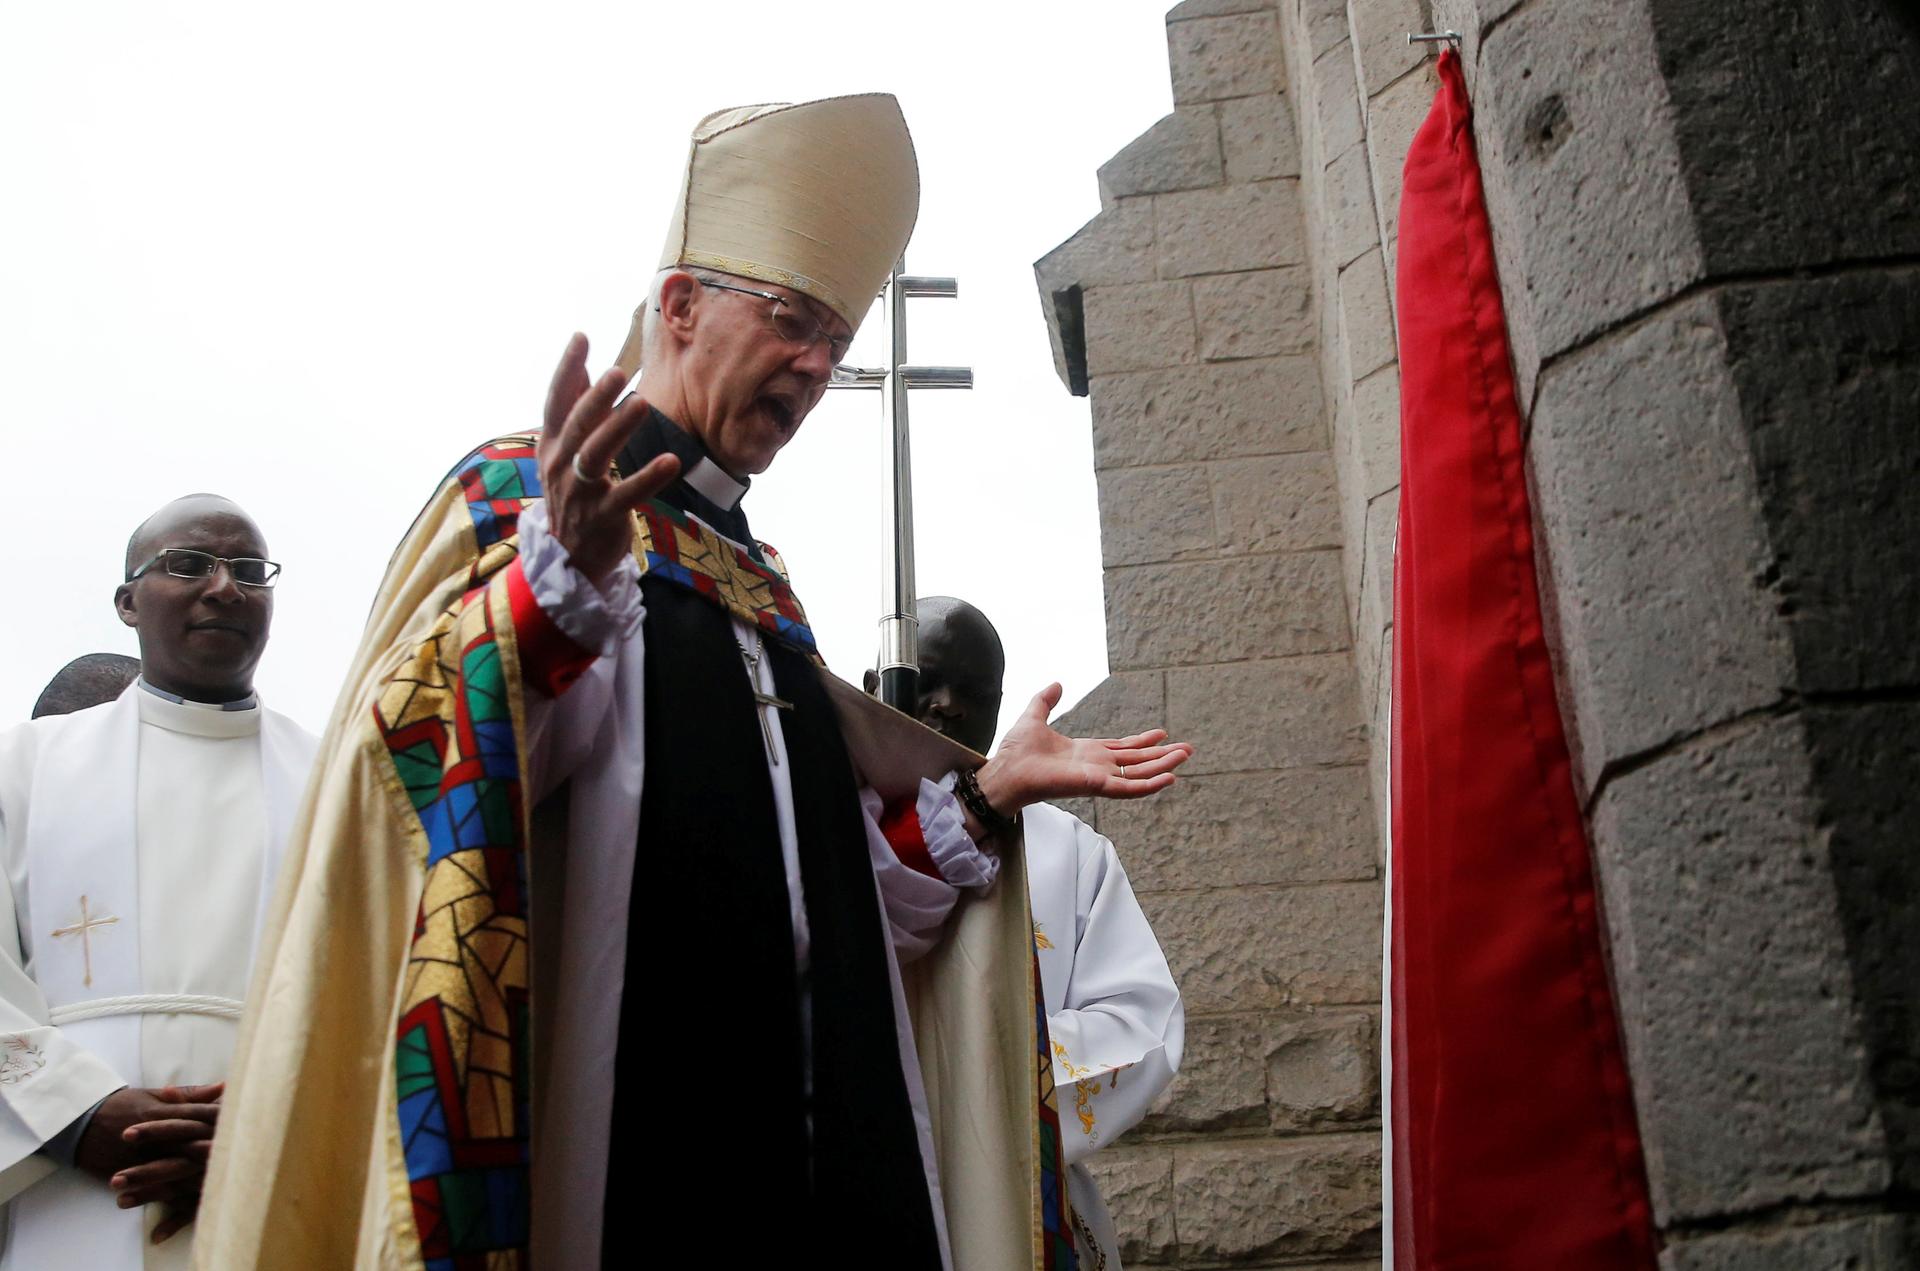 Archbishop of Canterbury Justin Welby prays outside the church after attending a special service at the Anglican Church of Kenya St. Stephen's Cathedral in Nairobi, Kenya January 26, 2020.